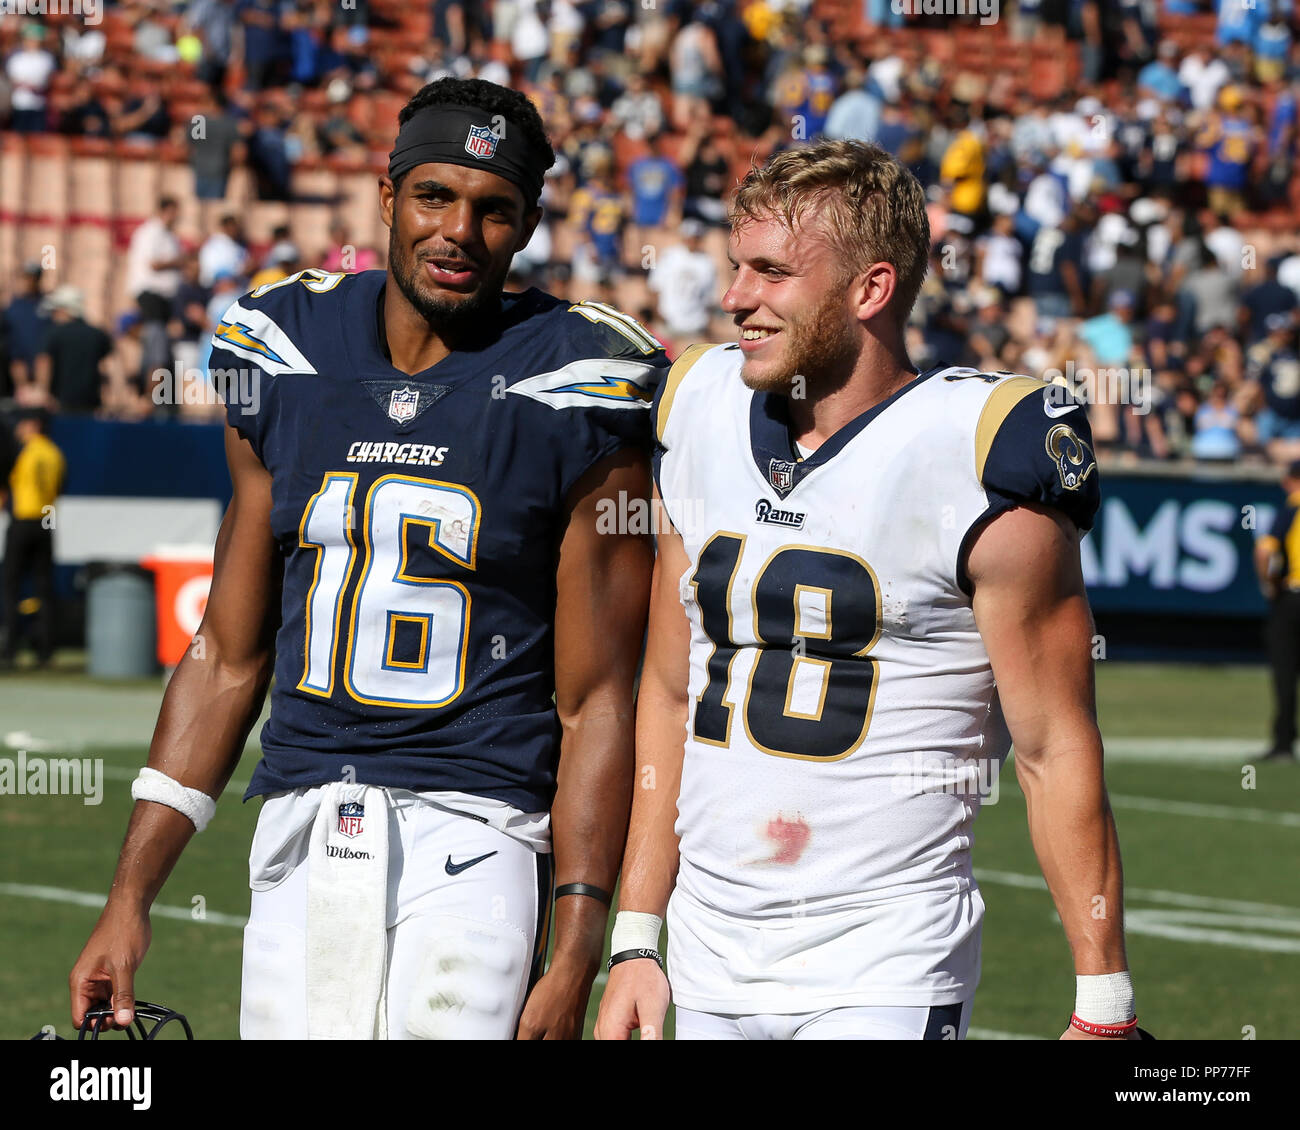 Los Angeles, CA, USA. 23rd Sep, 2018. Los Angeles Rams wide receiver Cooper  Kupp (18) and Los Angeles Chargers wide receiver Tyrell Williams (16) after  the NFL Los Angeles Chargers vs Los